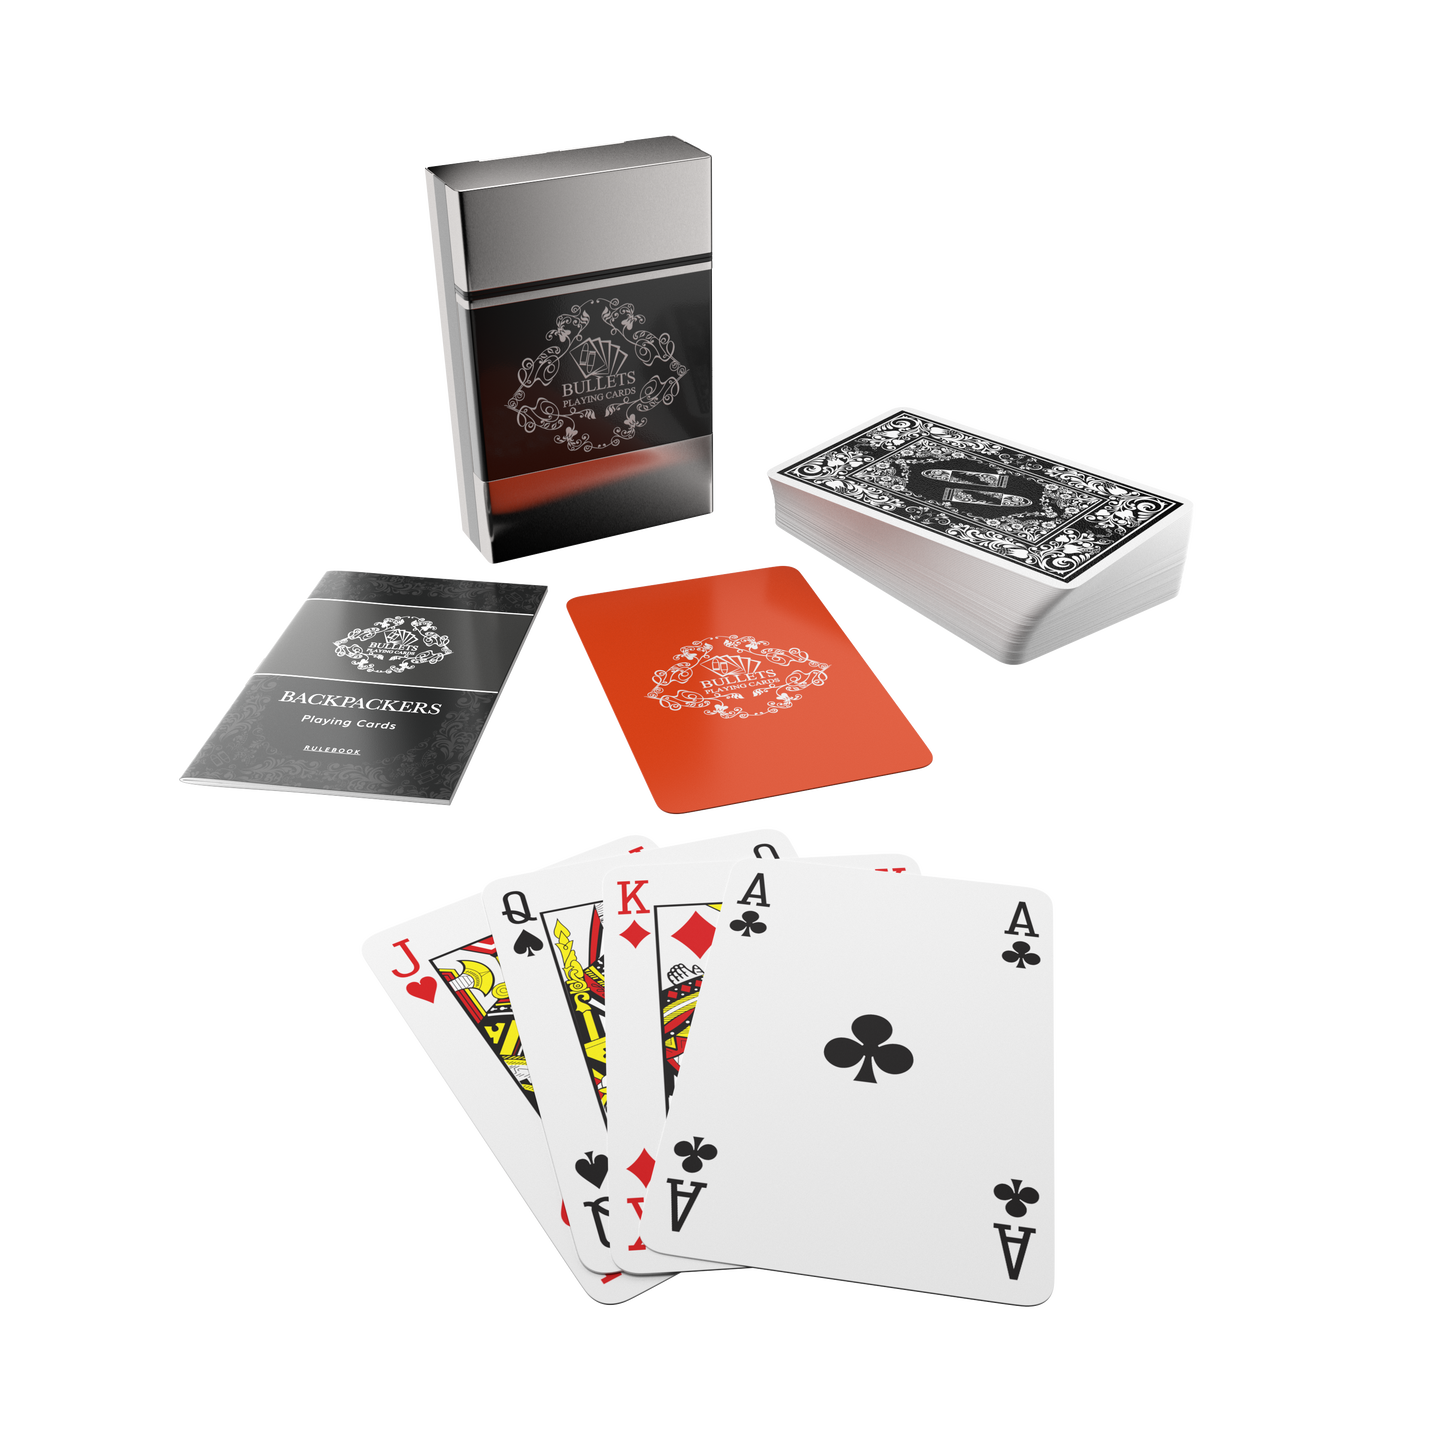 Backpacker Playing Cards, including plastic playing cards, aluminum box and rules for 5 travel games